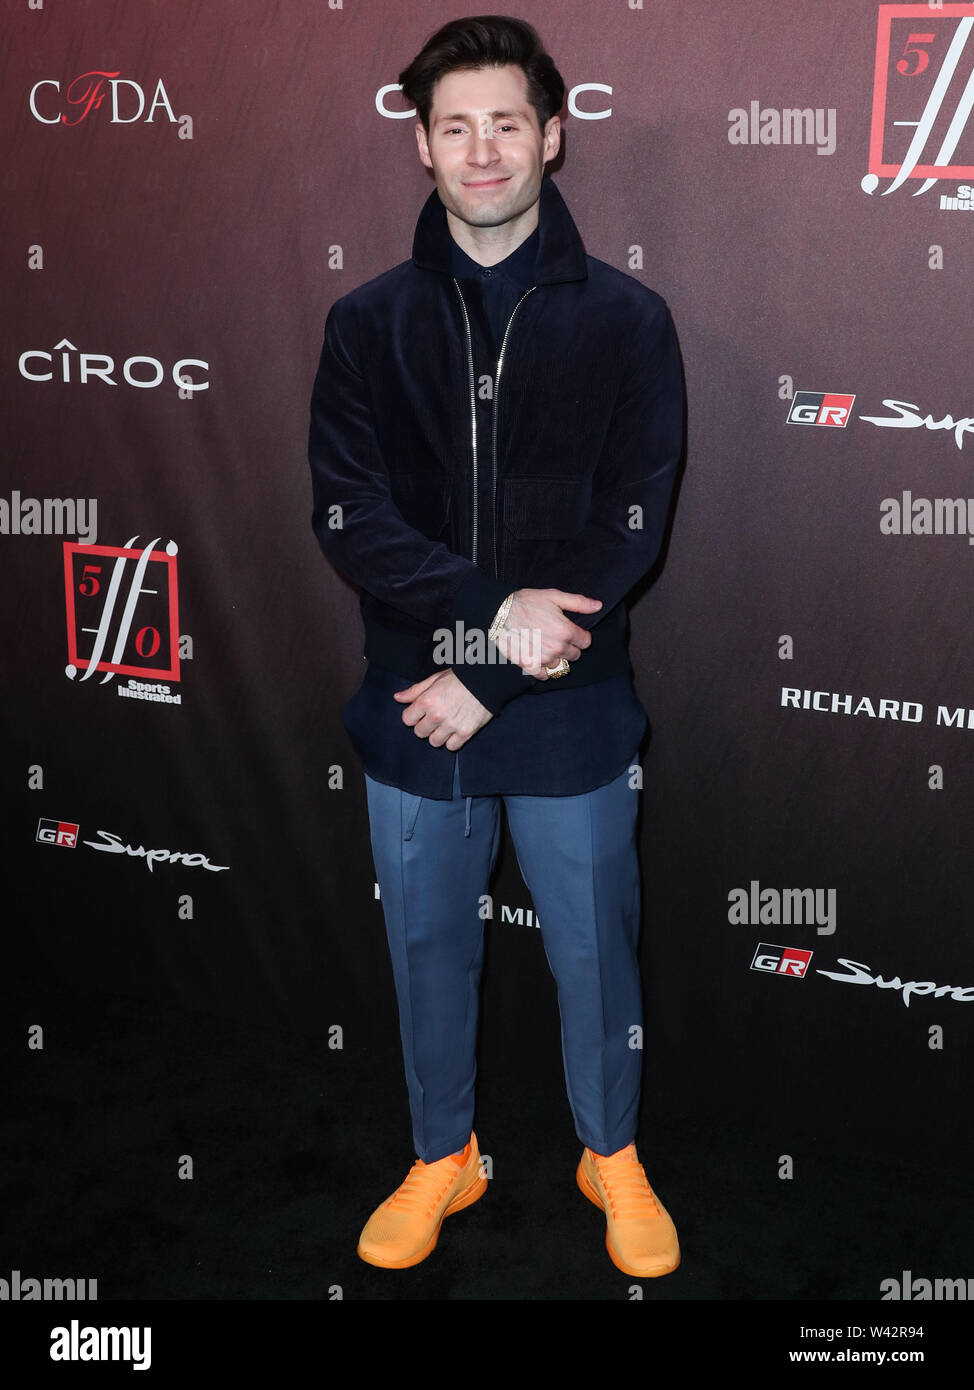 Hollywood, United States. 18th July, 2019. HOLLYWOOD, LOS ANGELES, CALIFORNIA, USA - JULY 18: Ryan Goldstein arrives at the Sports Illustrated Fashionable 50 held at Sunset Room Hollywood on July 18, 2019 in Hollywood, Los Angeles, California, United States. (Photo by Xavier Collin/Image Press Agency) Credit: Image Press Agency/Alamy Live News Stock Photo